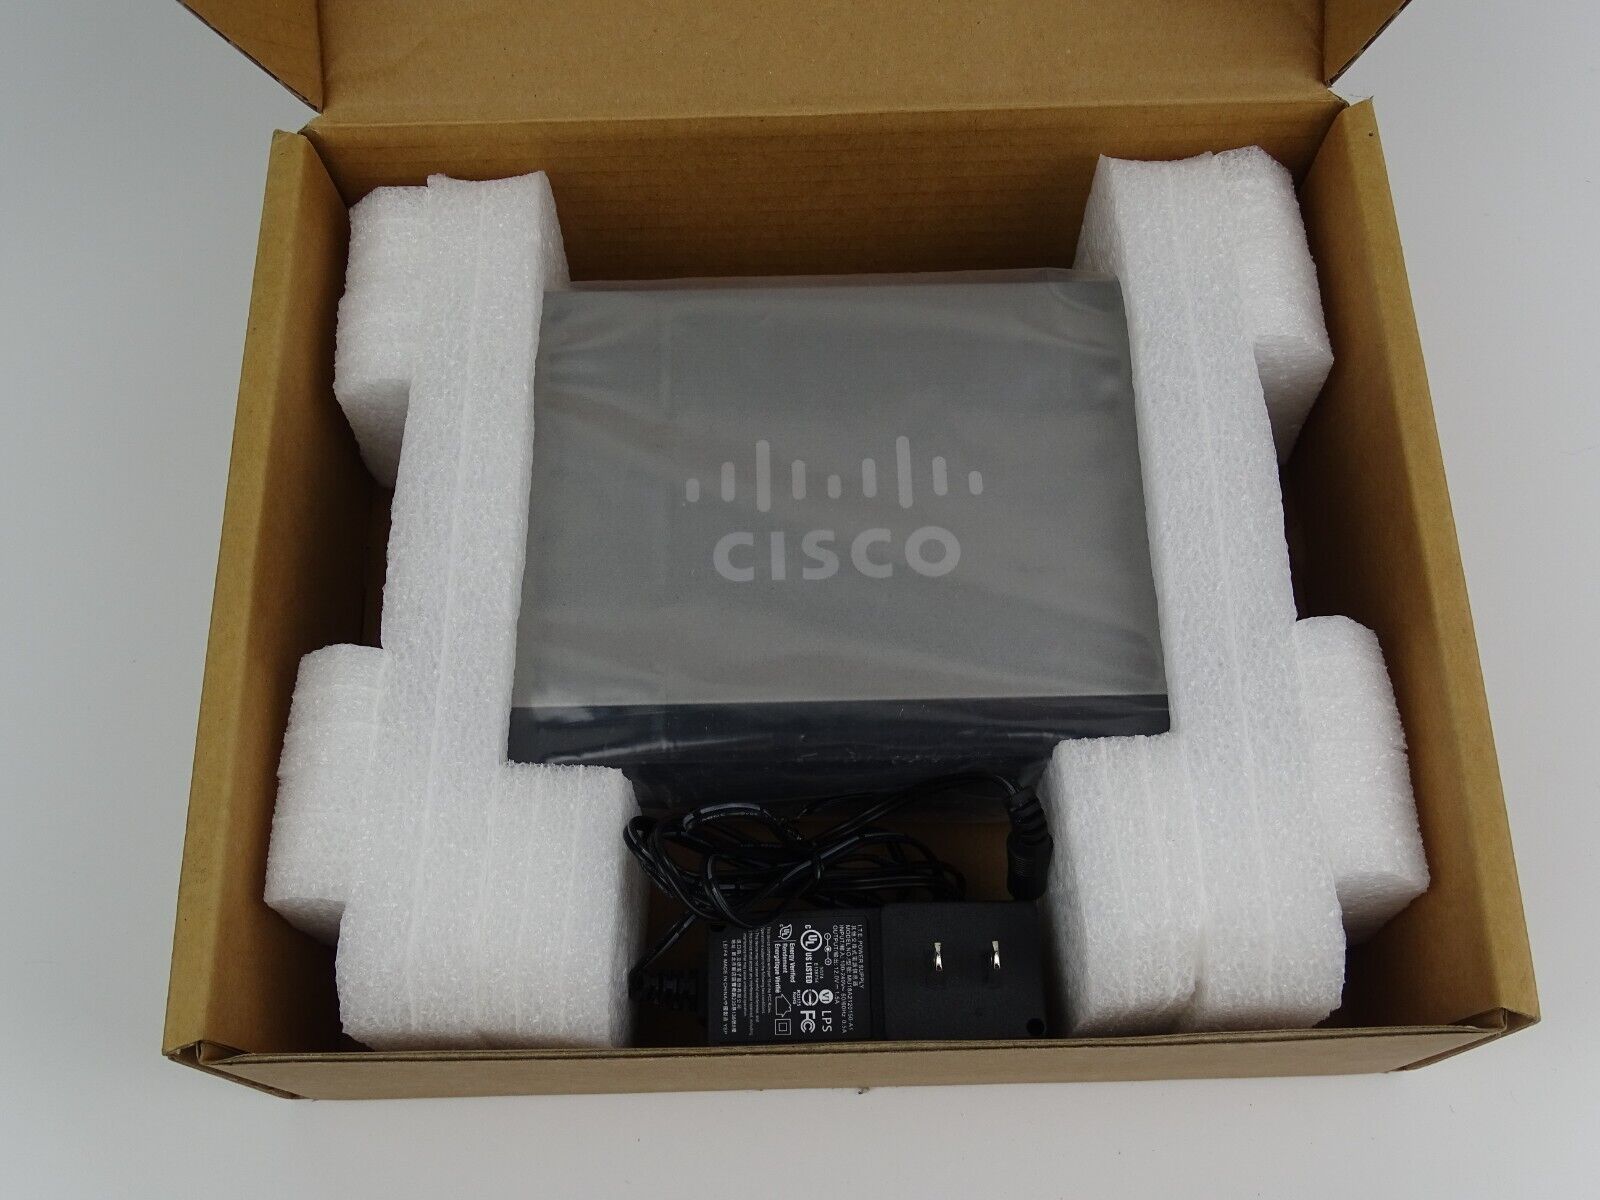 Cisco RV320 Dual Gigabit WAN VPN Router Used Complete With Box Tested 